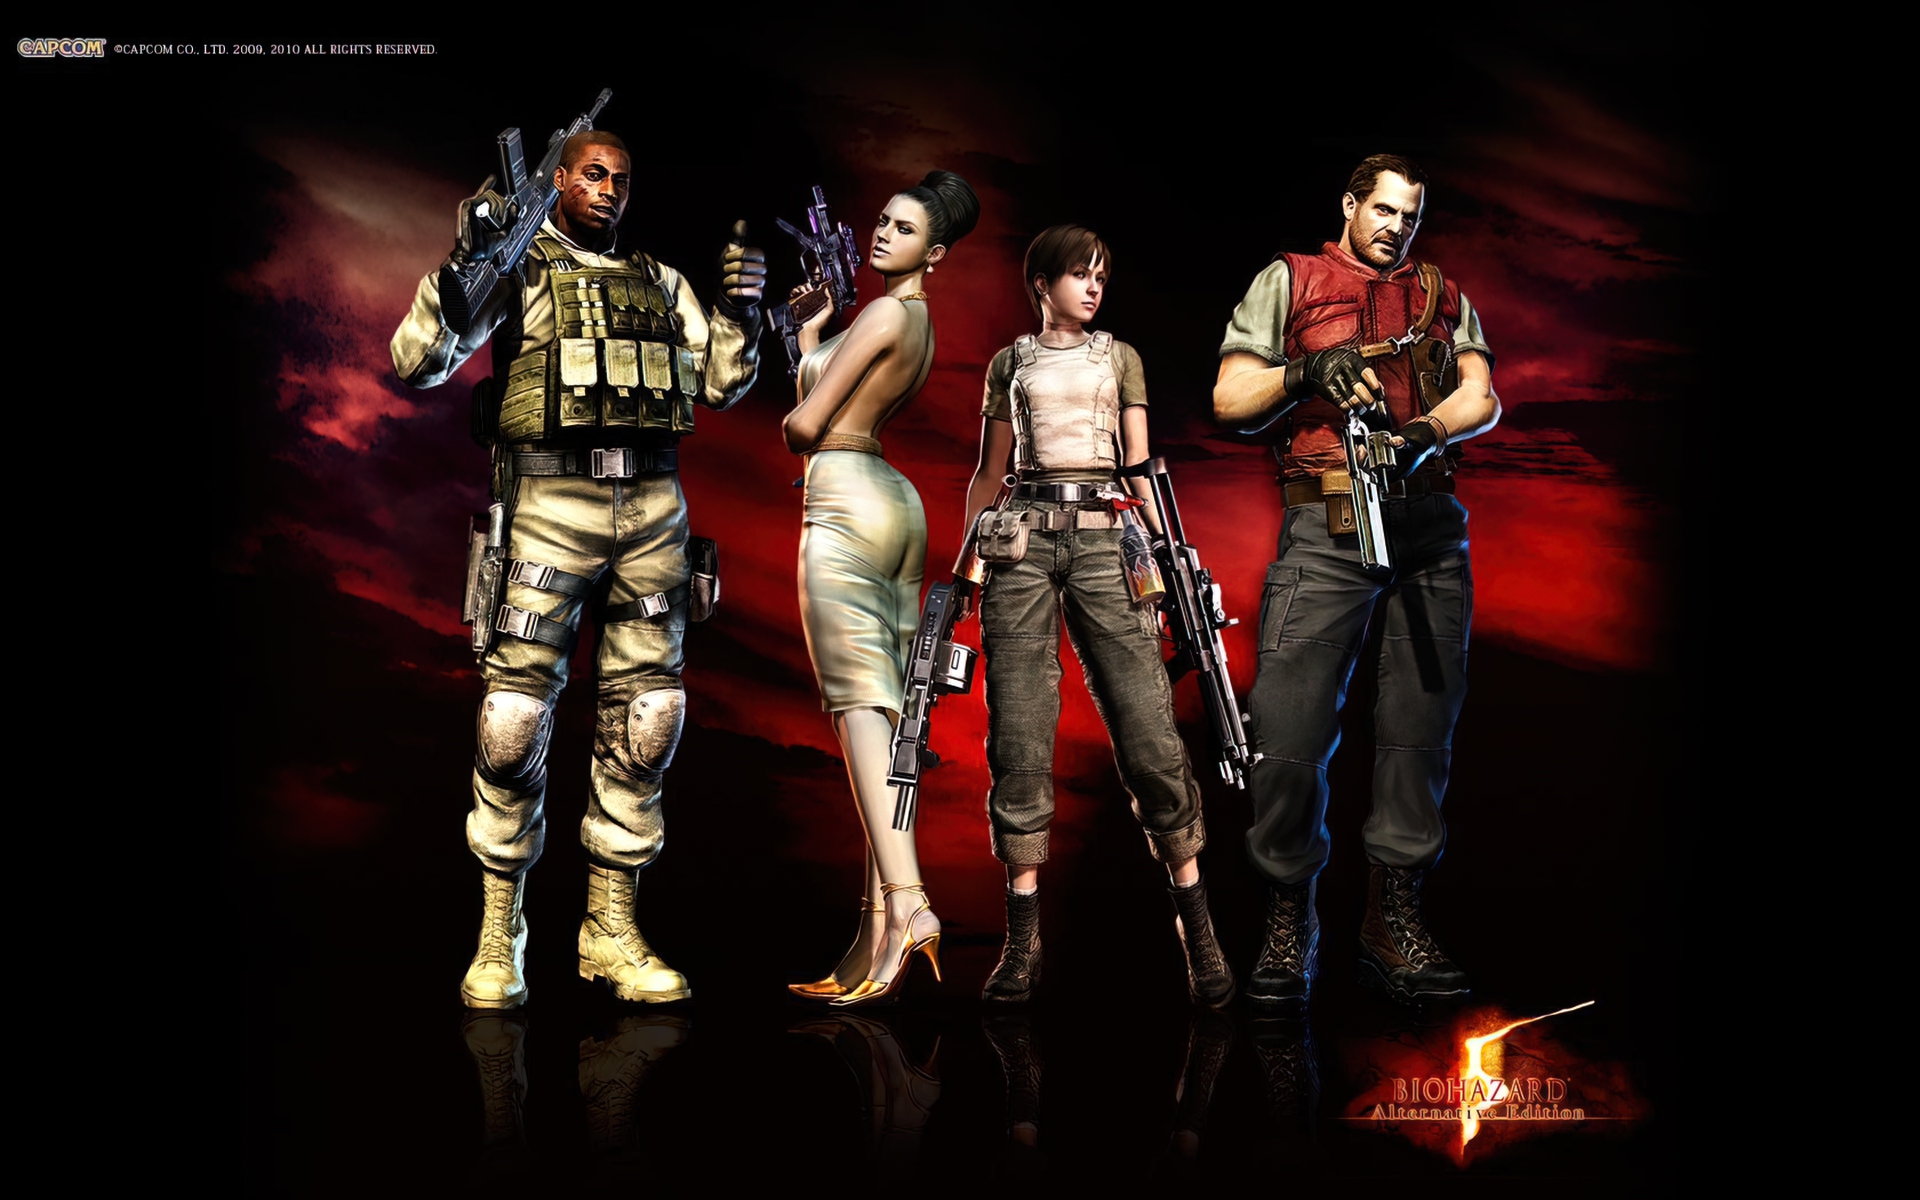 Video Game Resident Evil 5 HD Wallpaper | Background Image